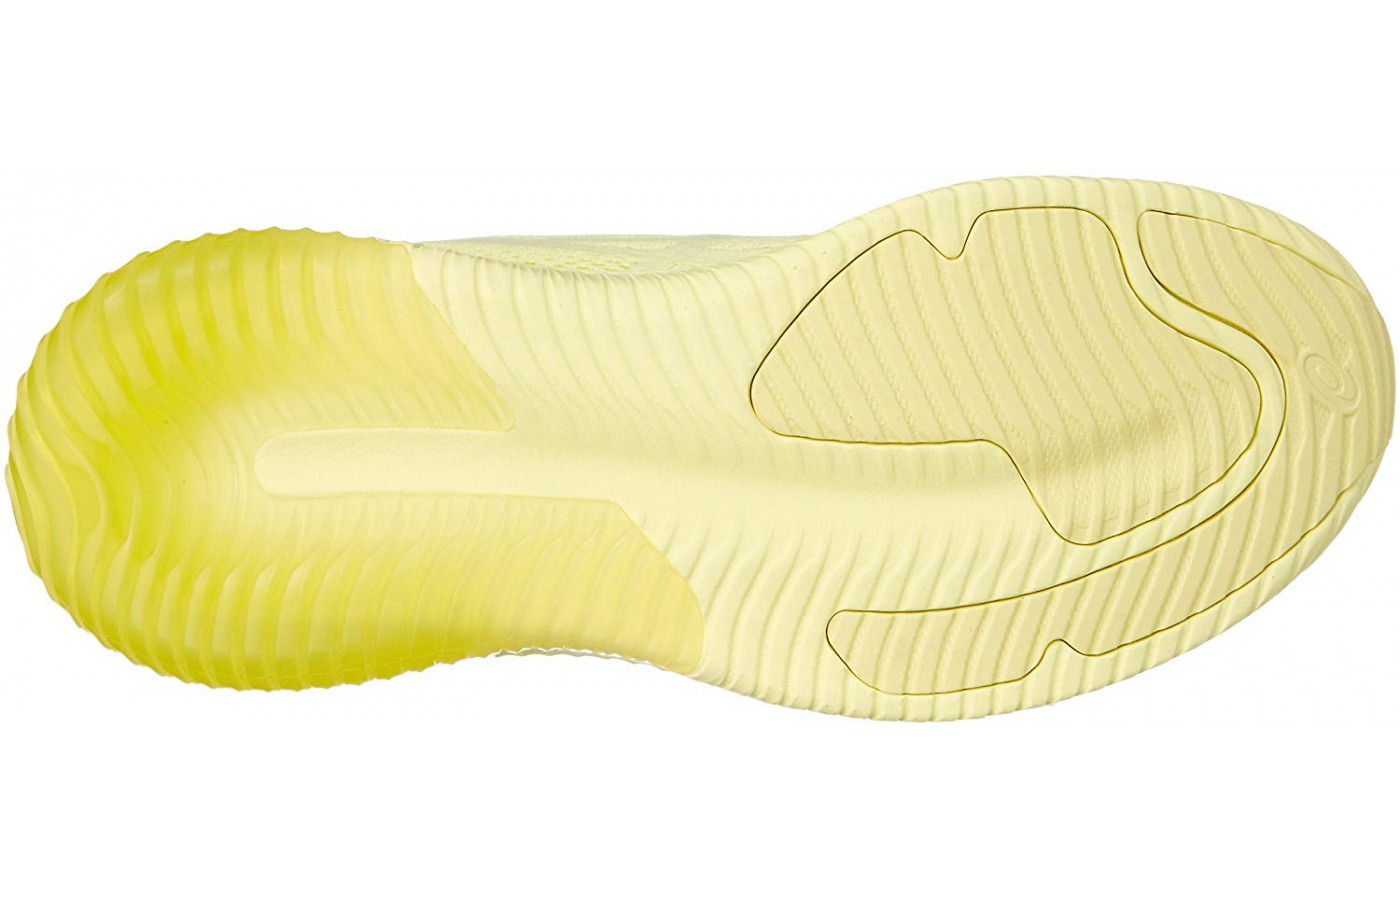 The Gel Kenun MX features a durable rubber outsole